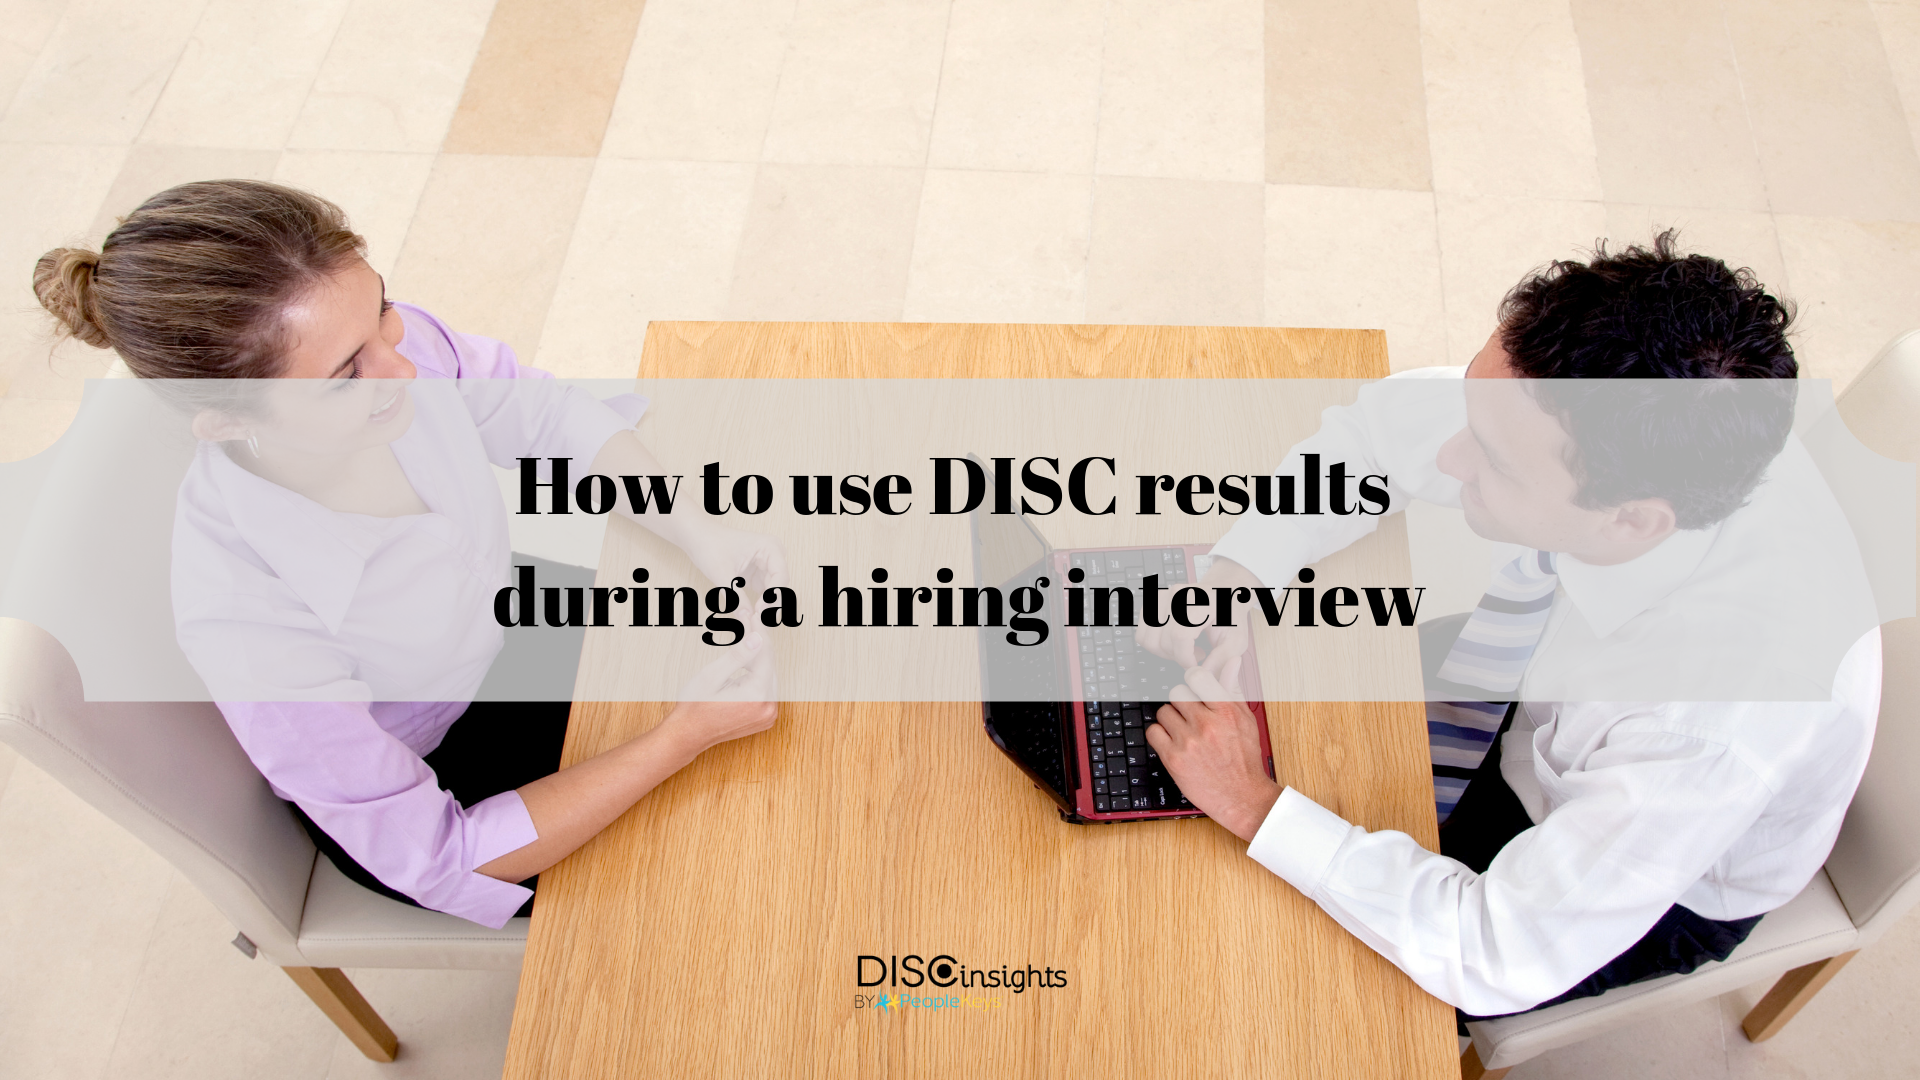 How to use DISC results during a hiring interview